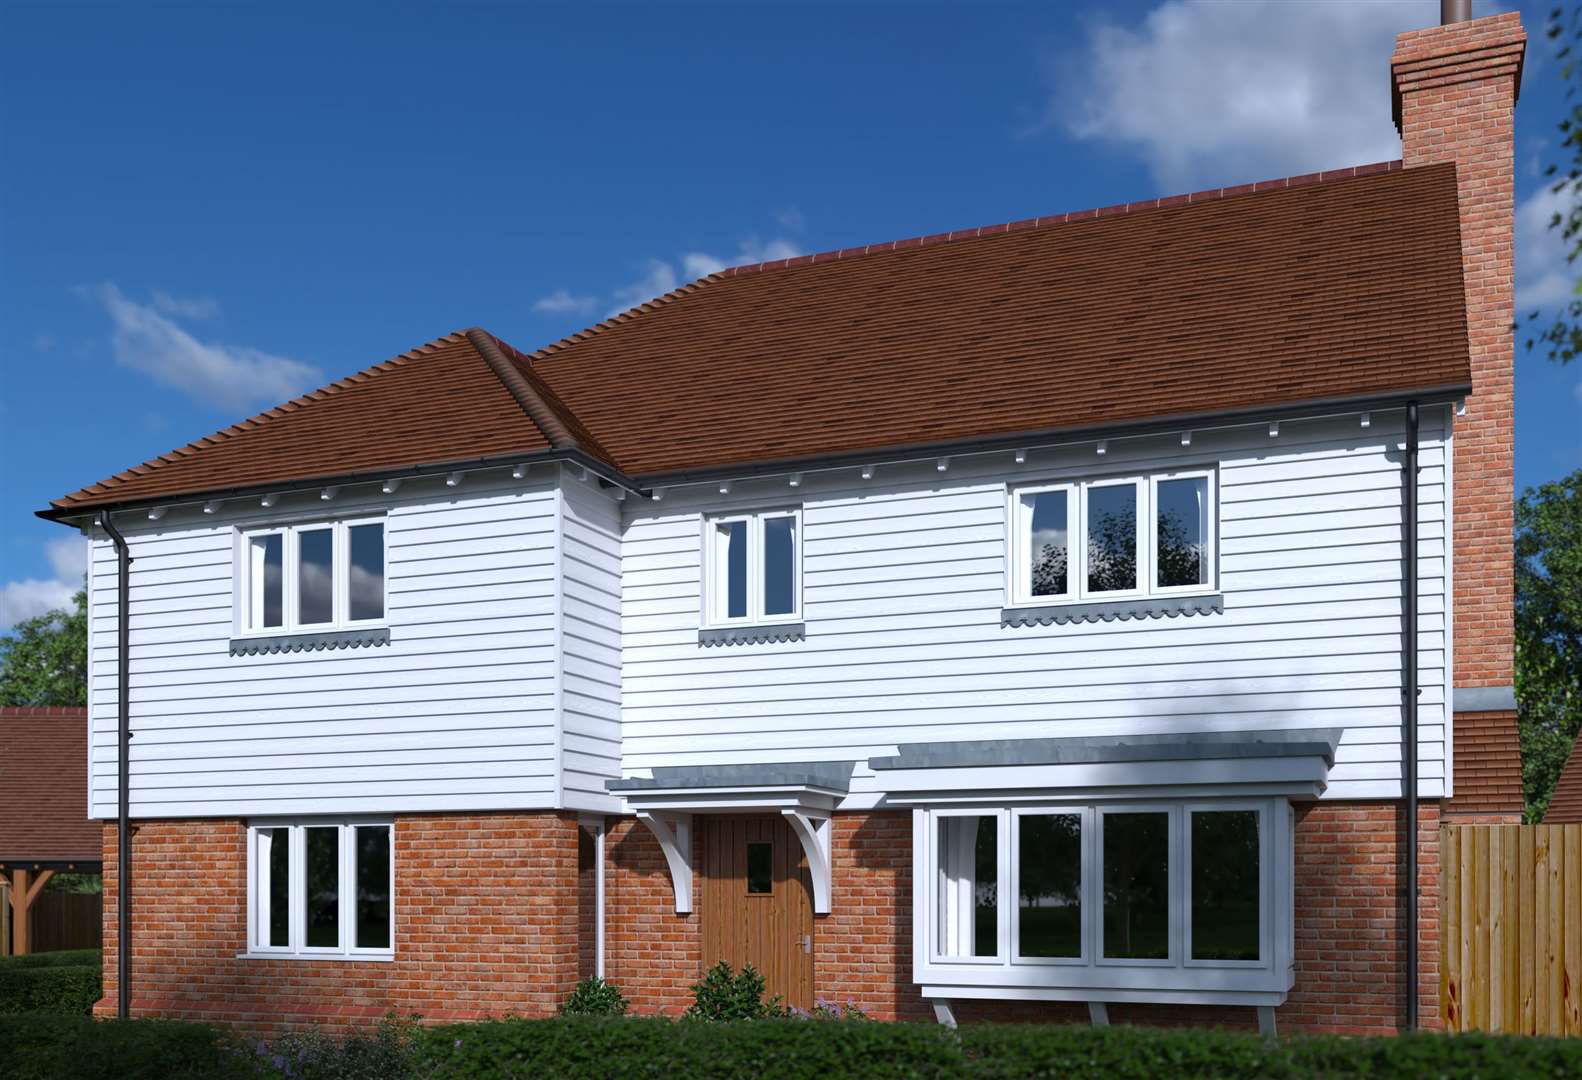 Find out about The Orchards, by Endeavour Land and New Homes, at Faversham